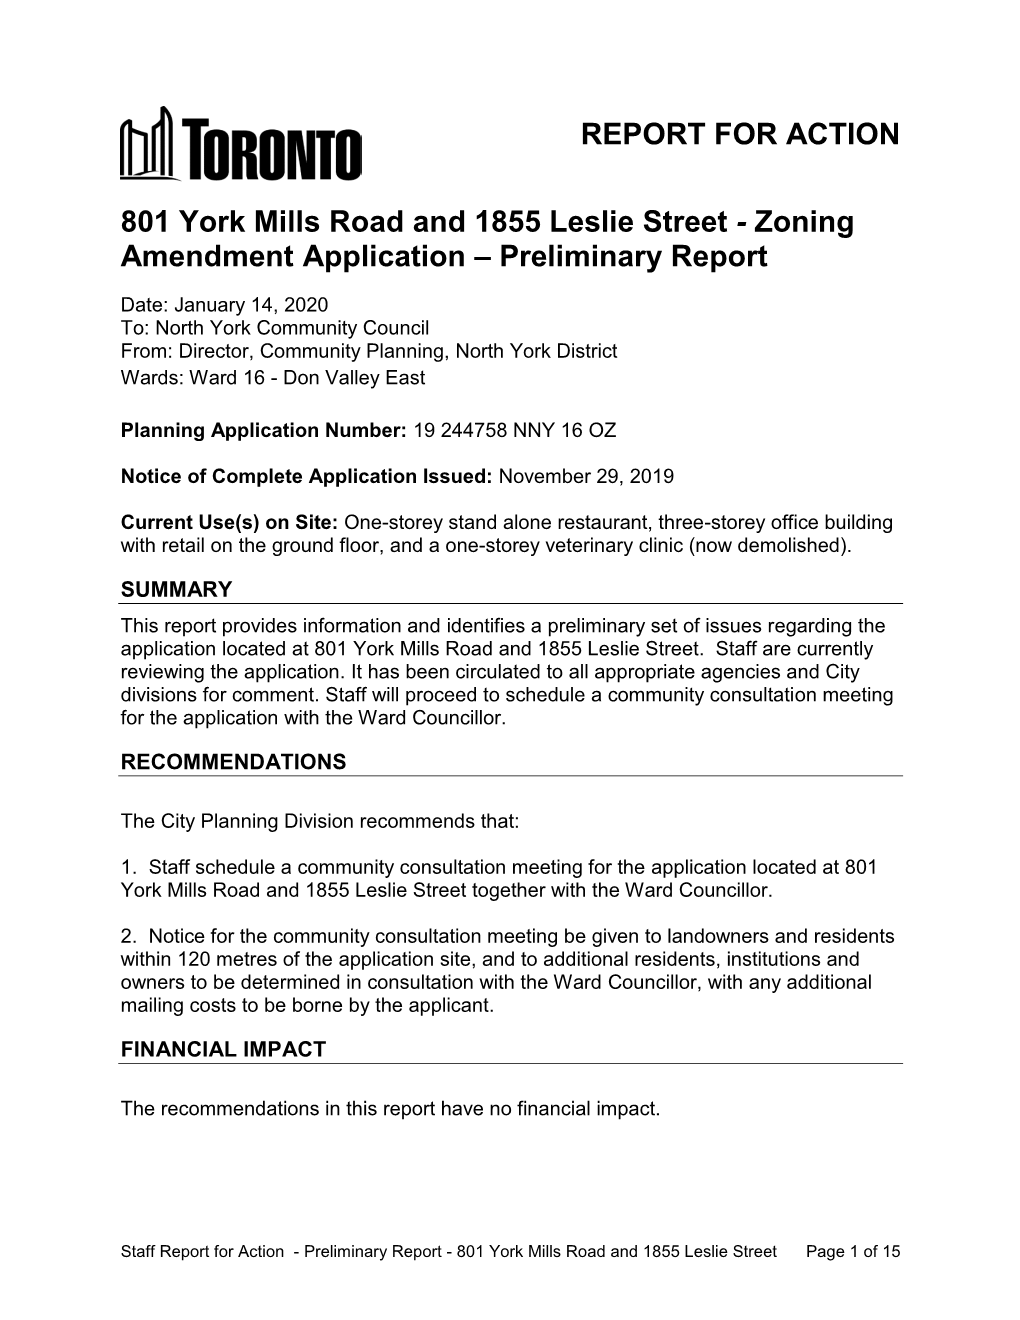 801 York Mills Road and 1855 Leslie Street - Zoning Amendment Application – Preliminary Report